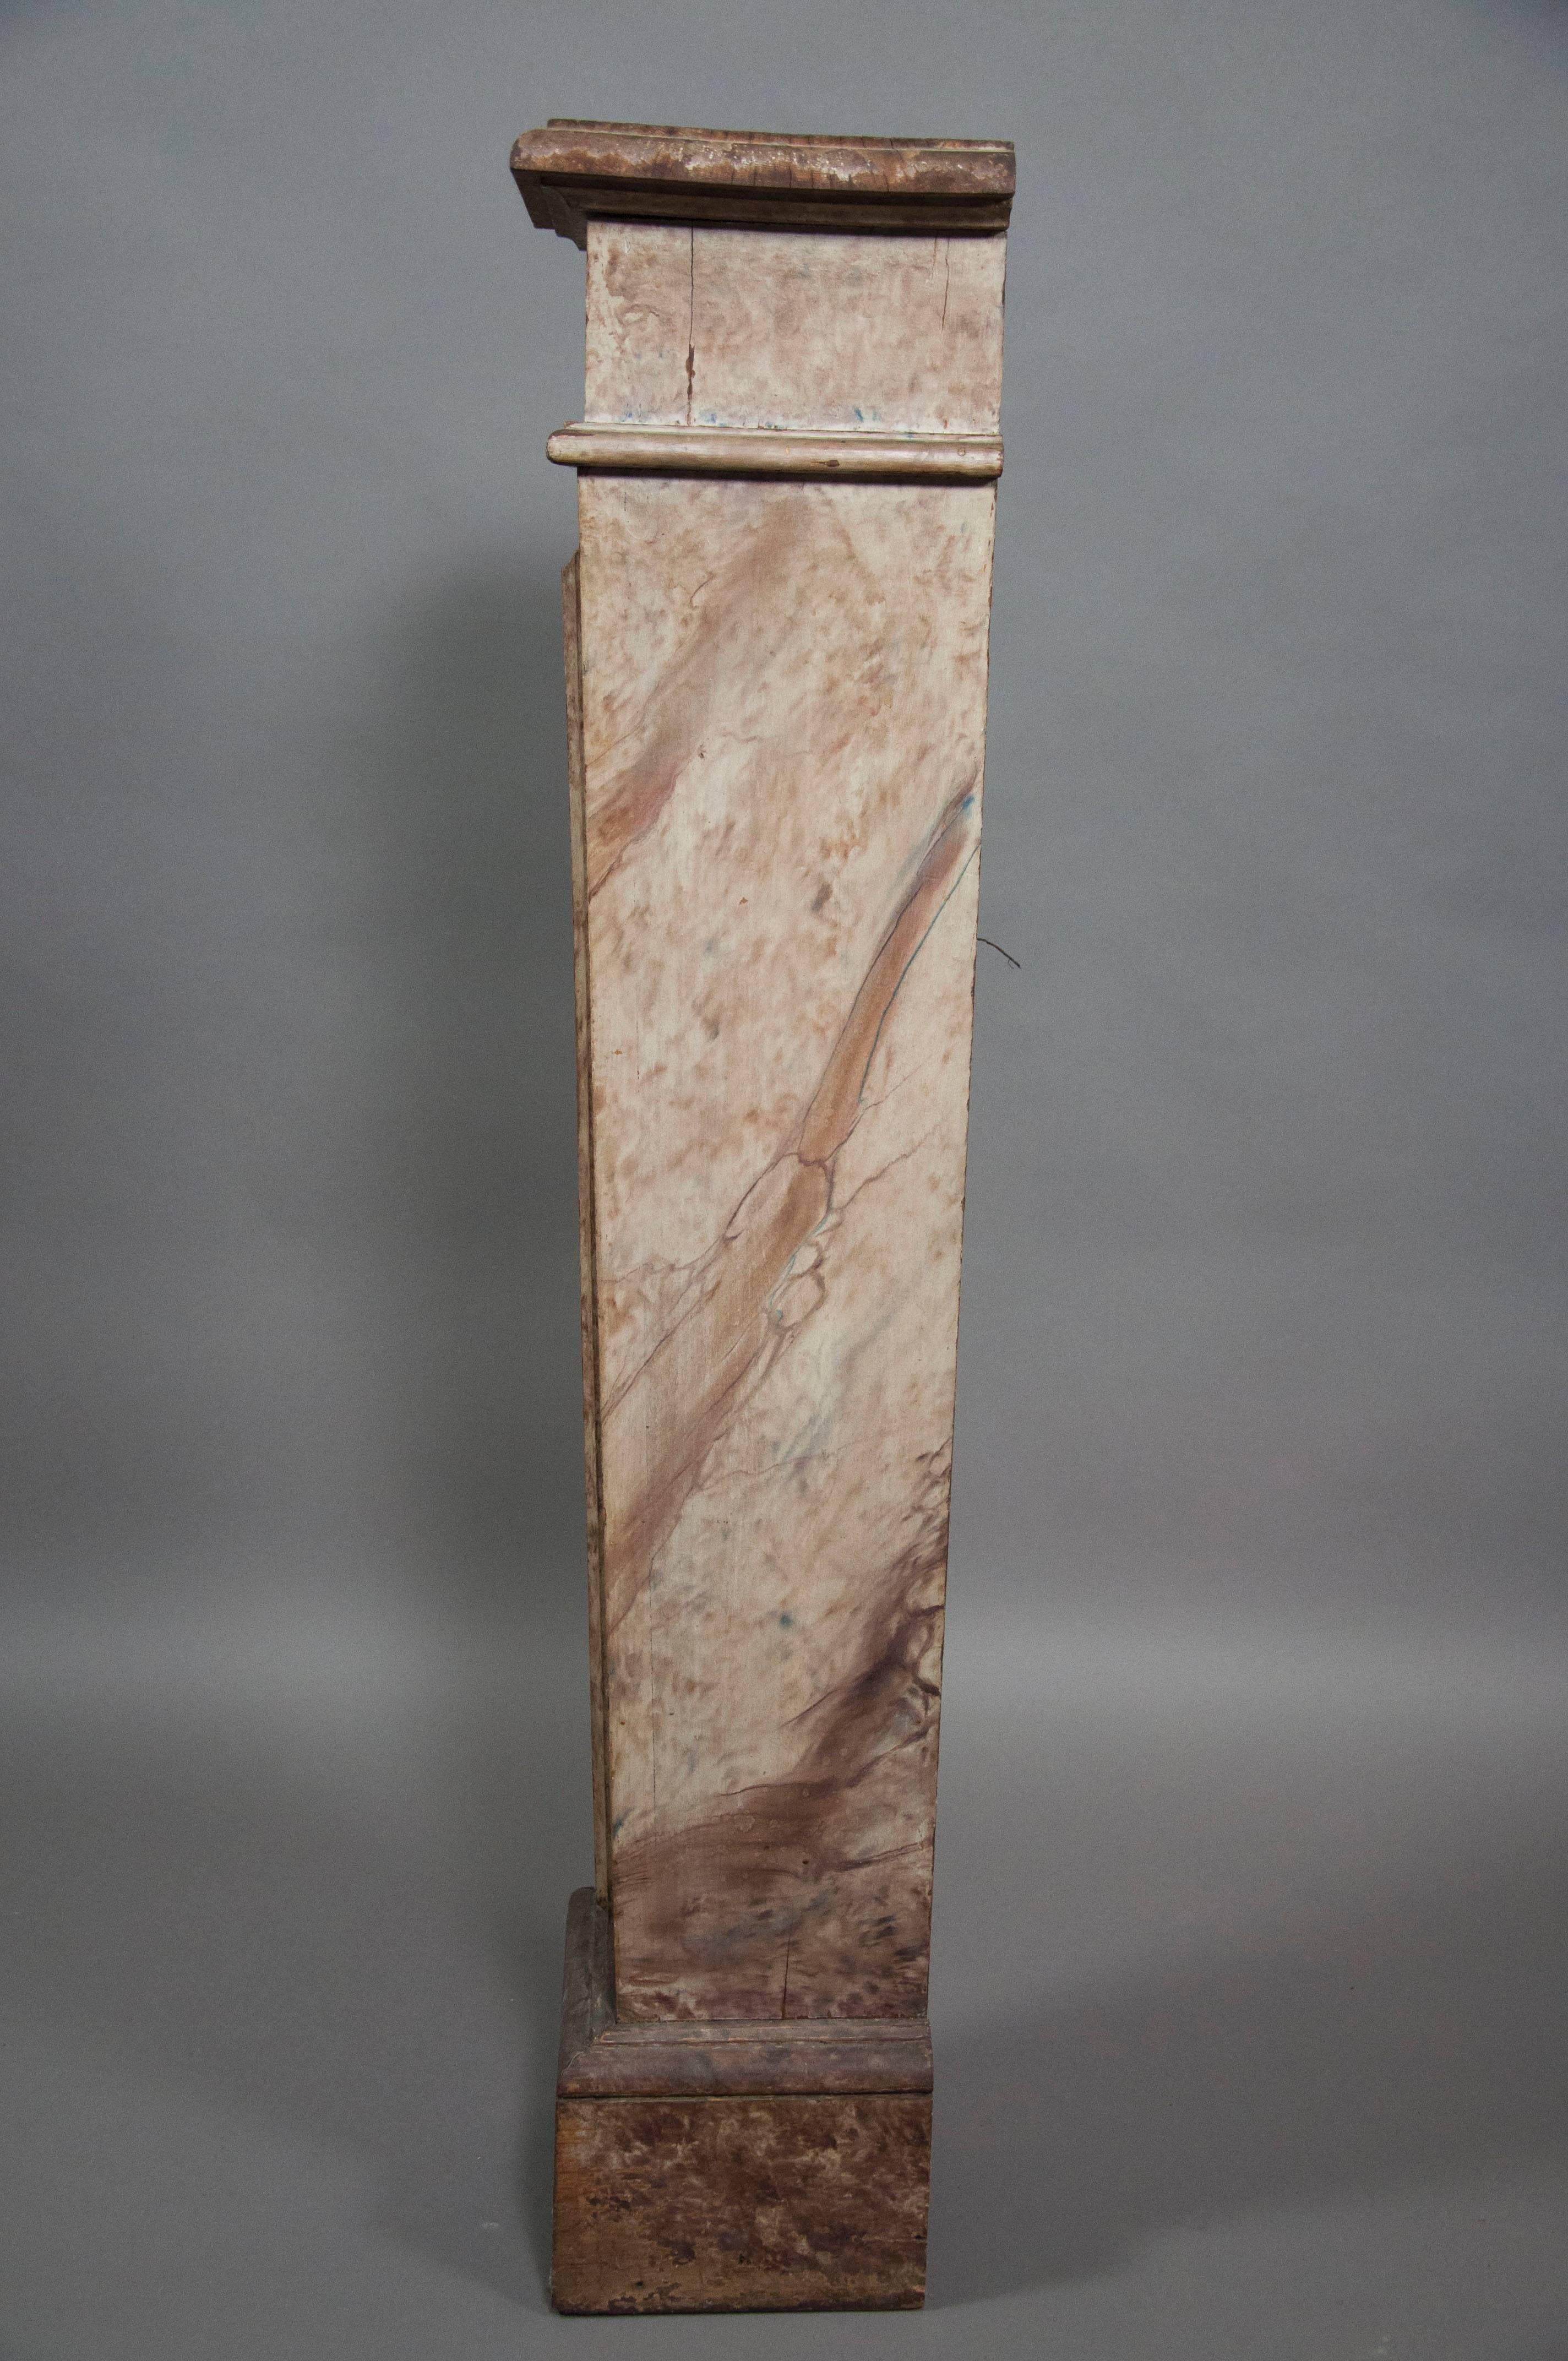 Rectangular top over a panelled tapered midsection on a plinth base.